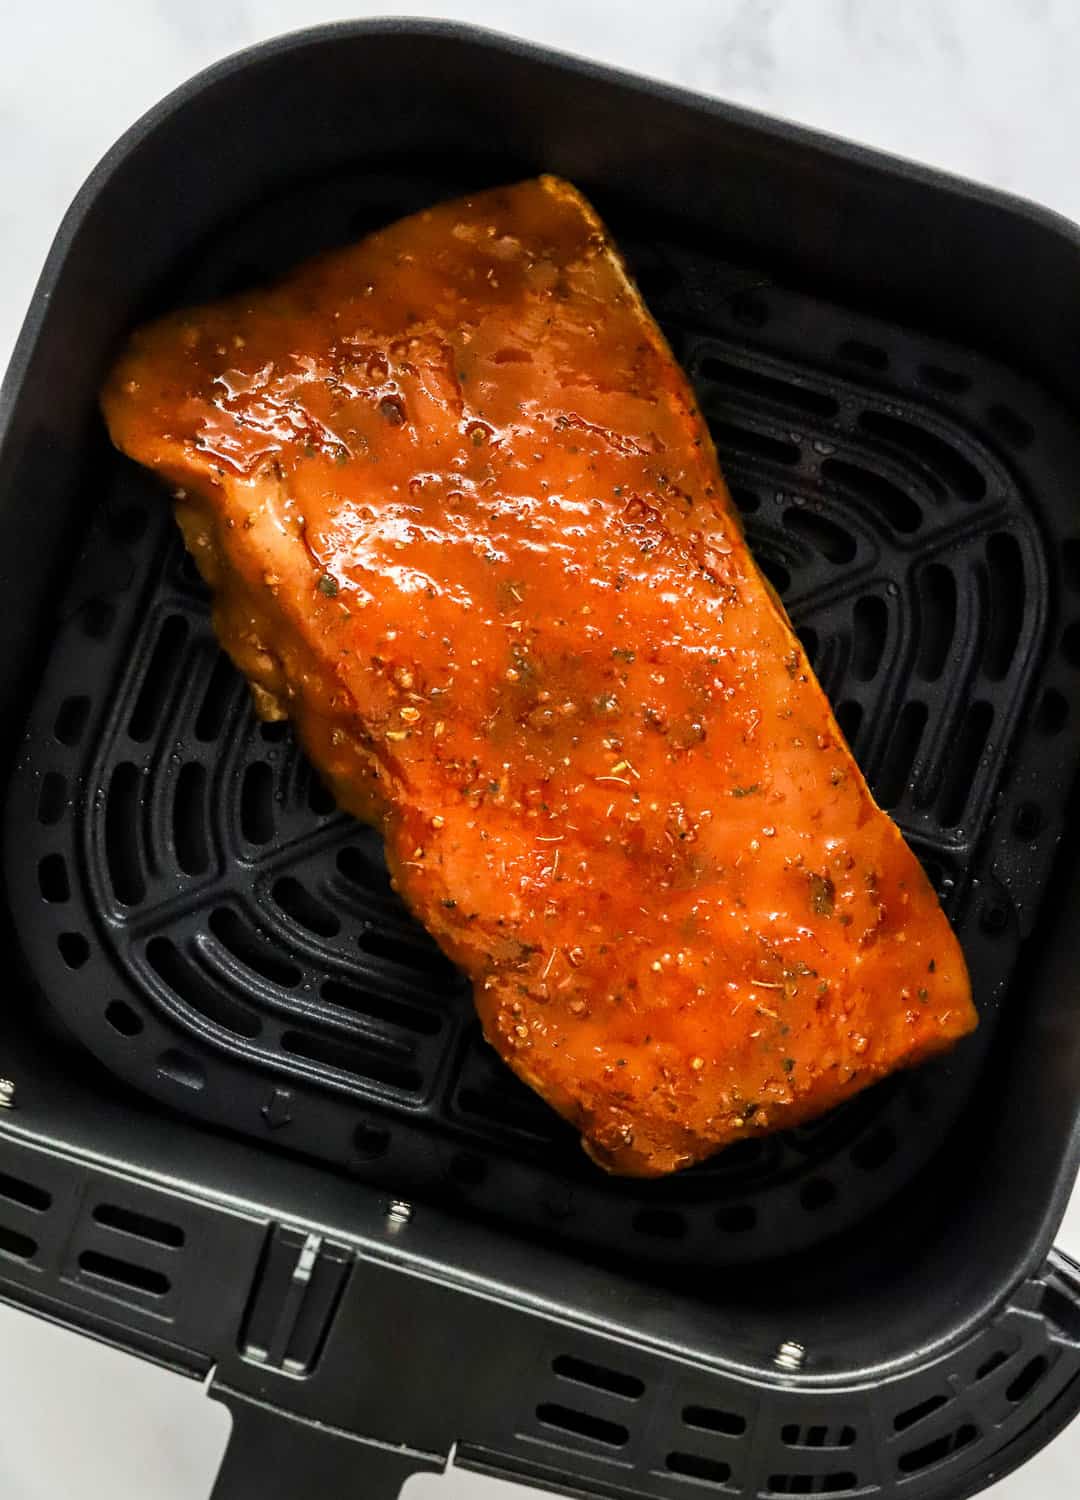 Uncooked glazed pork loin in a square air fryer basket